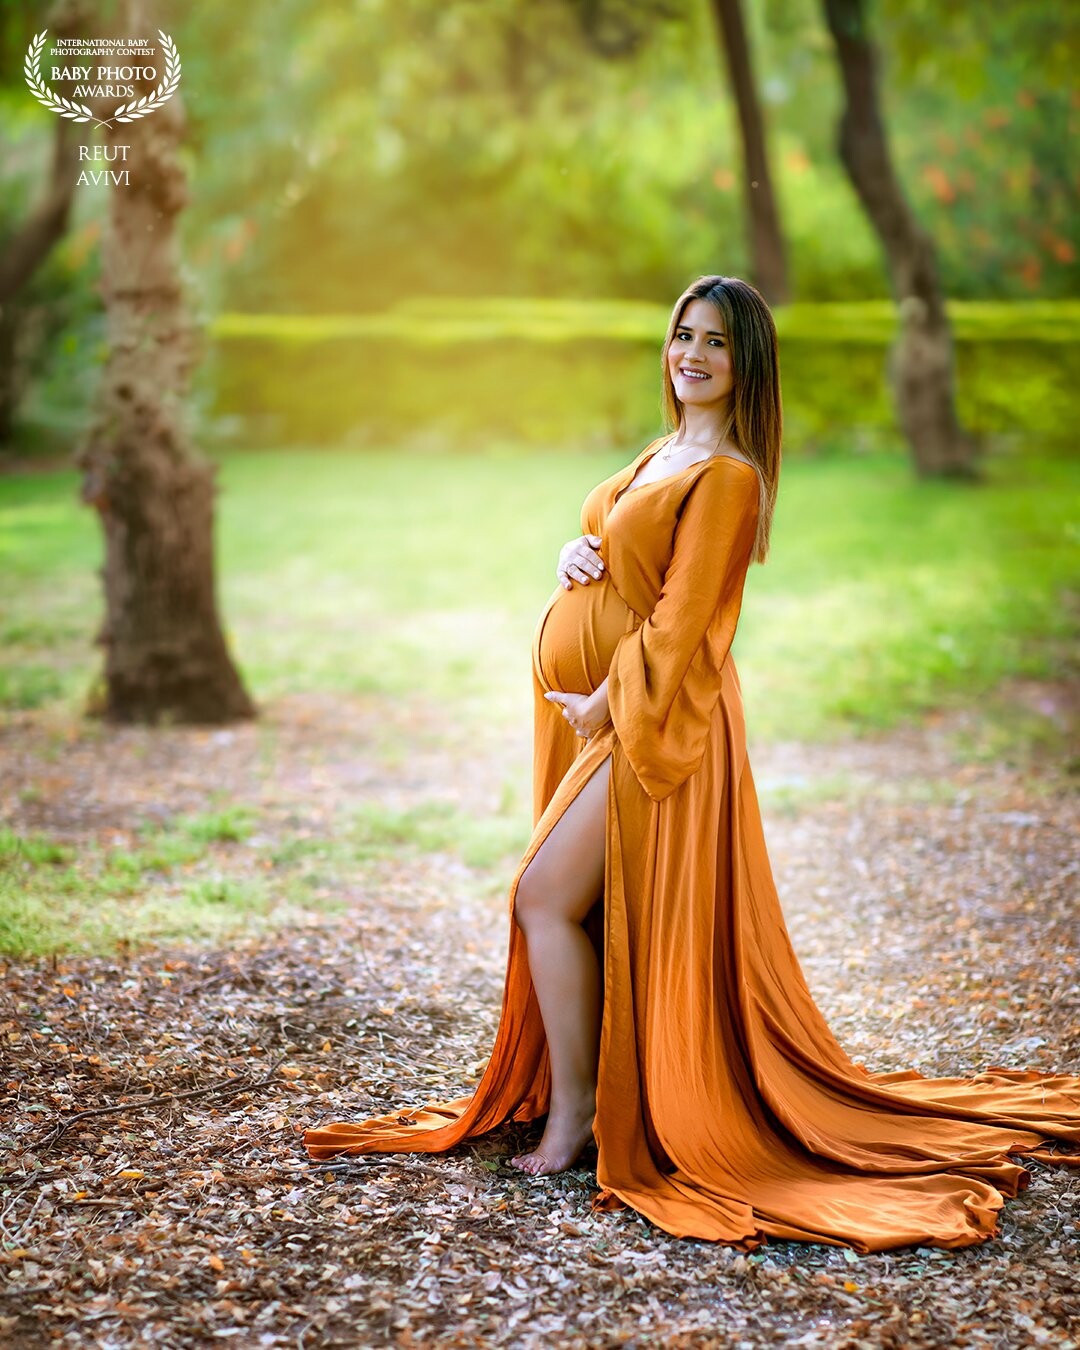 Beautiful Abigail preserves the memory of her first pregnancy in exciting pregnancy photos in the beautiful nature,<br />
The color combination of the dress and nature matched perfectly!